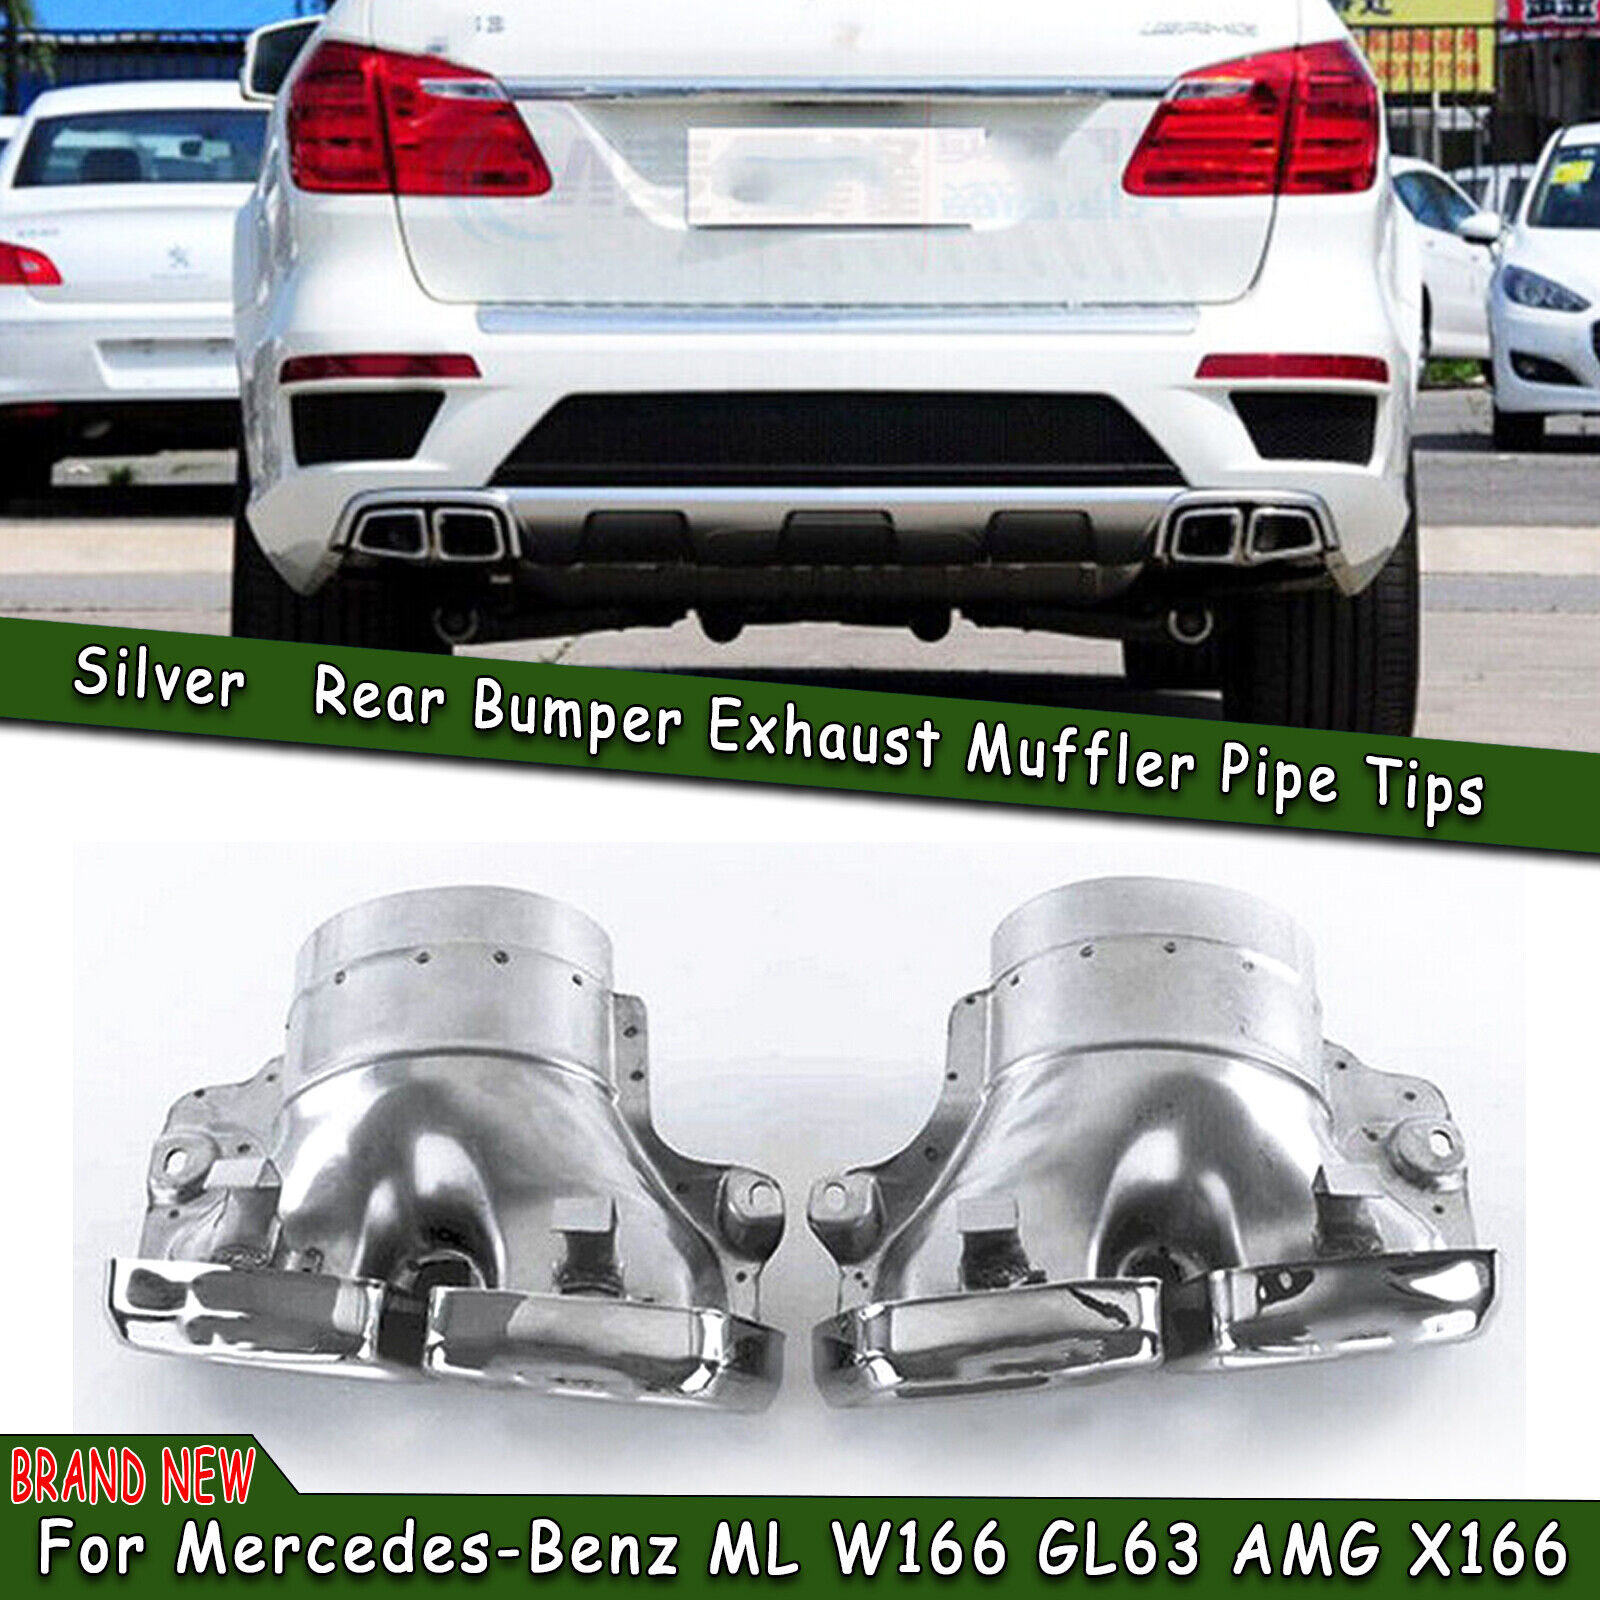 2x Rear Exhaust Pipe Tips For Mercedes-Benz ML W166 GL63 AMG X166 Silver